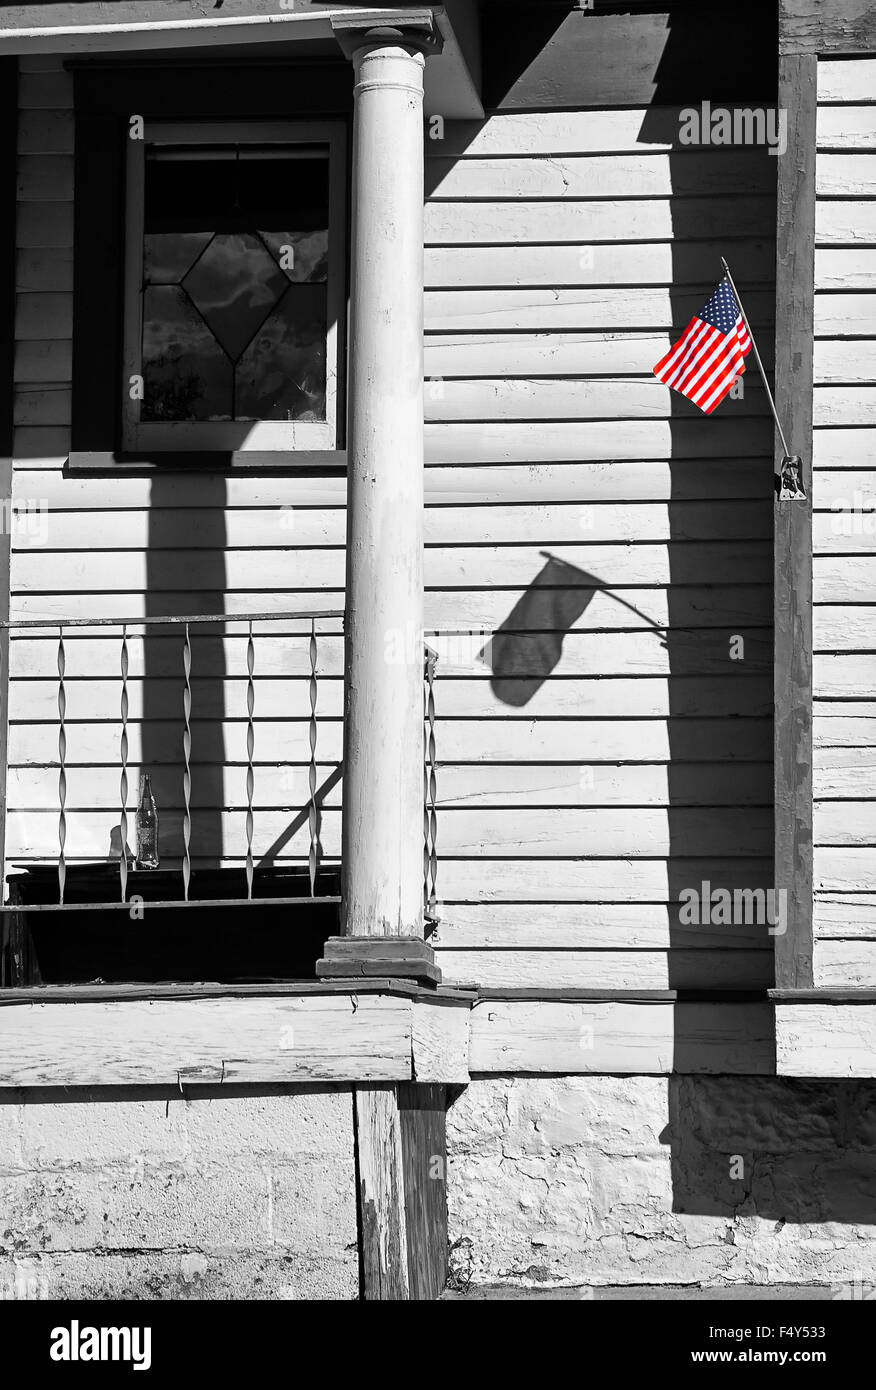 Patriotic display of small flag of USA  attached to house front. Stock Photo